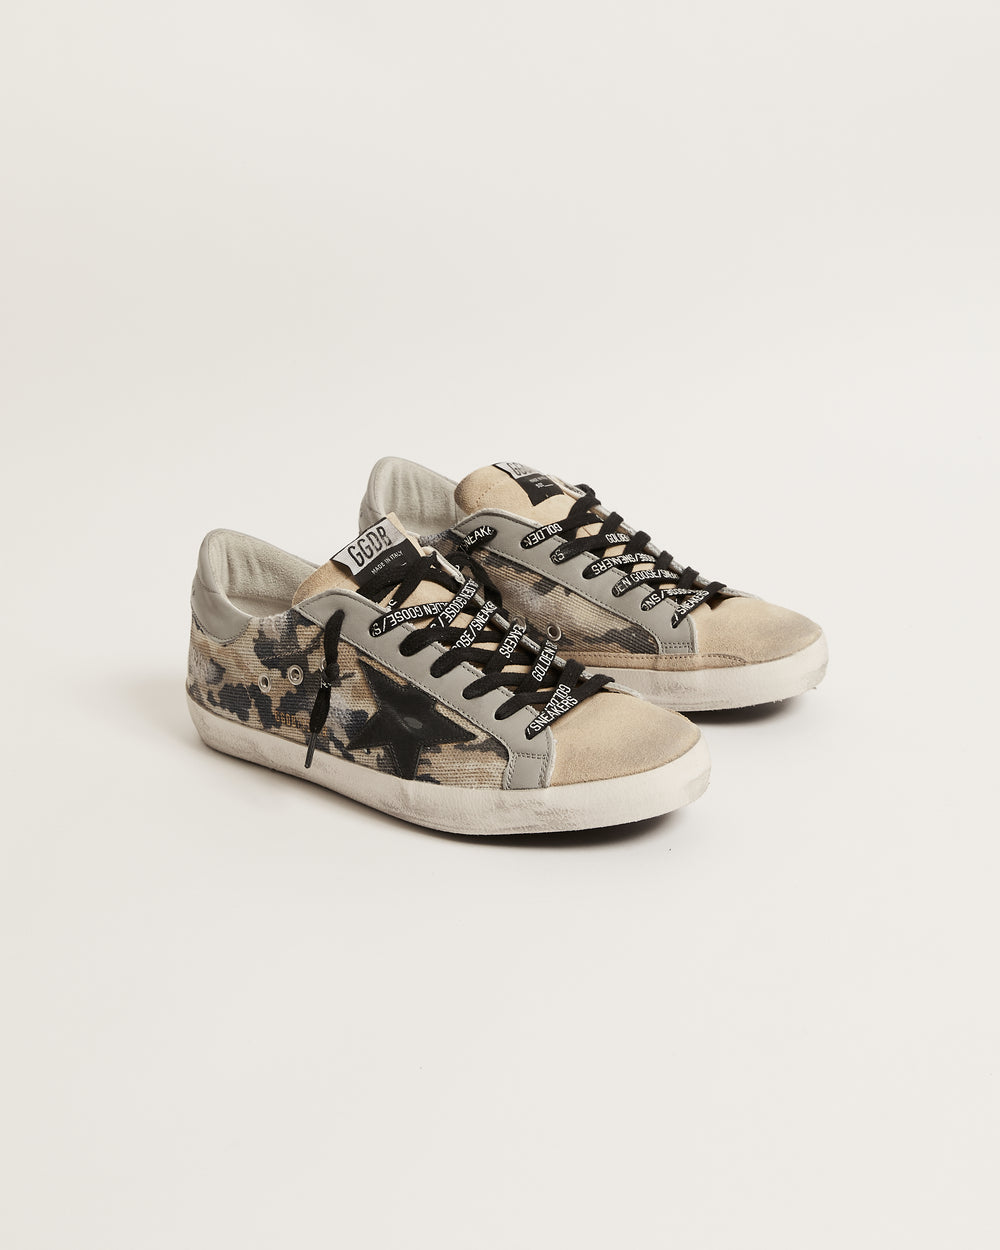 Super Star in Green Camouflage Canvas and Suede in Beige